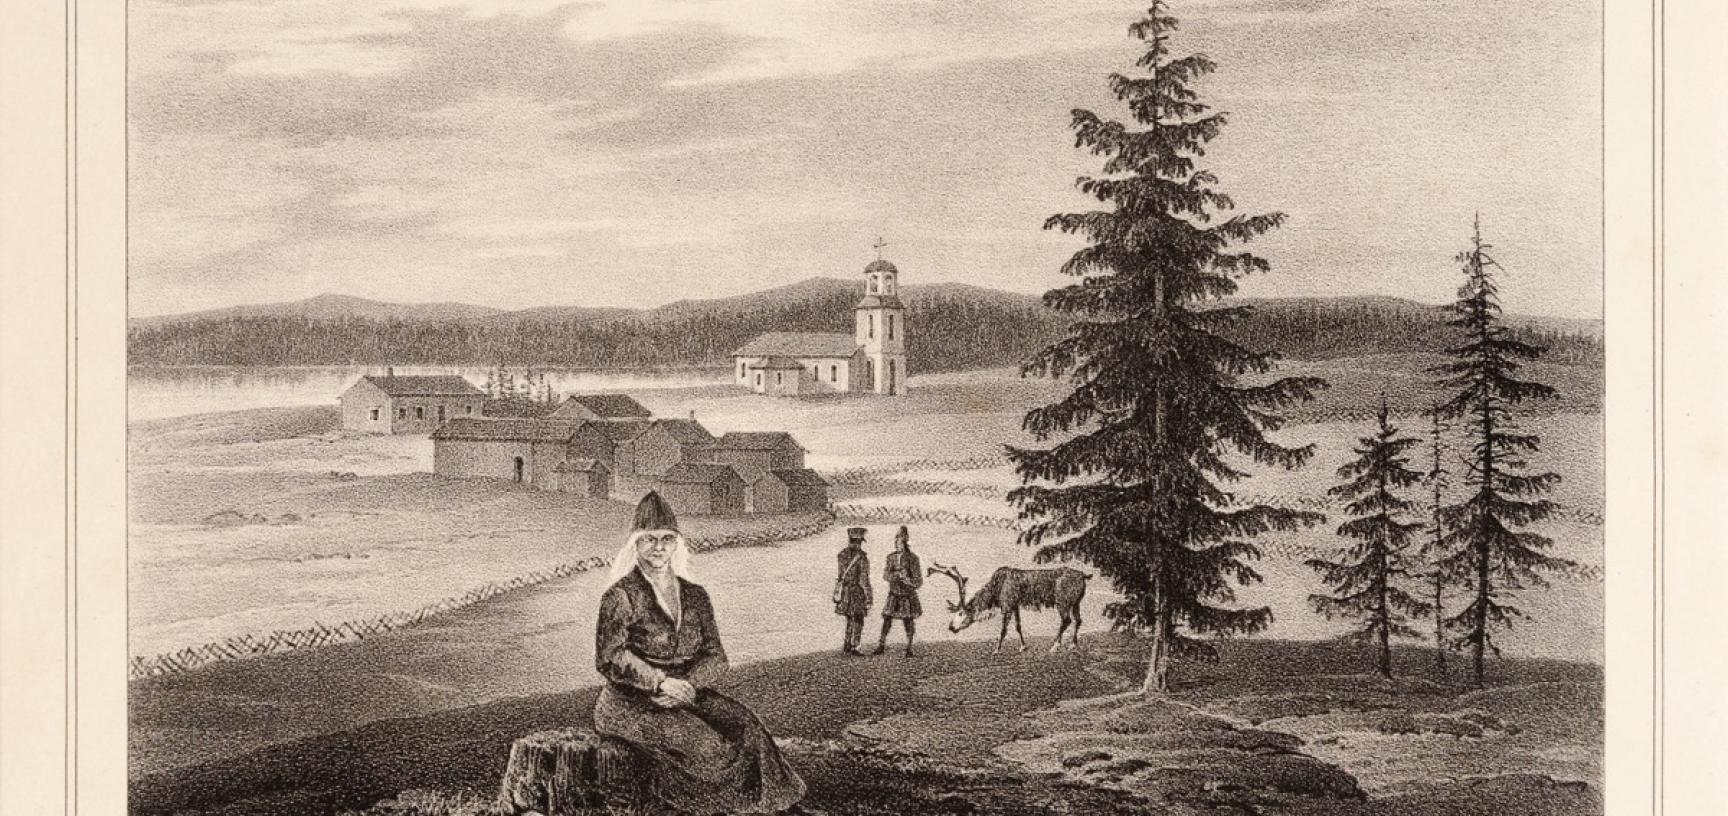 Lithograph produced in Berlin by Hermann Delius, published in 1841, showing a view of the ancient Saami settlement of Lycksele, Sweden, with its wooden church visible at the centre of the image. (Copyright Pitt Rivers Museum, University of Oxford. Accessi